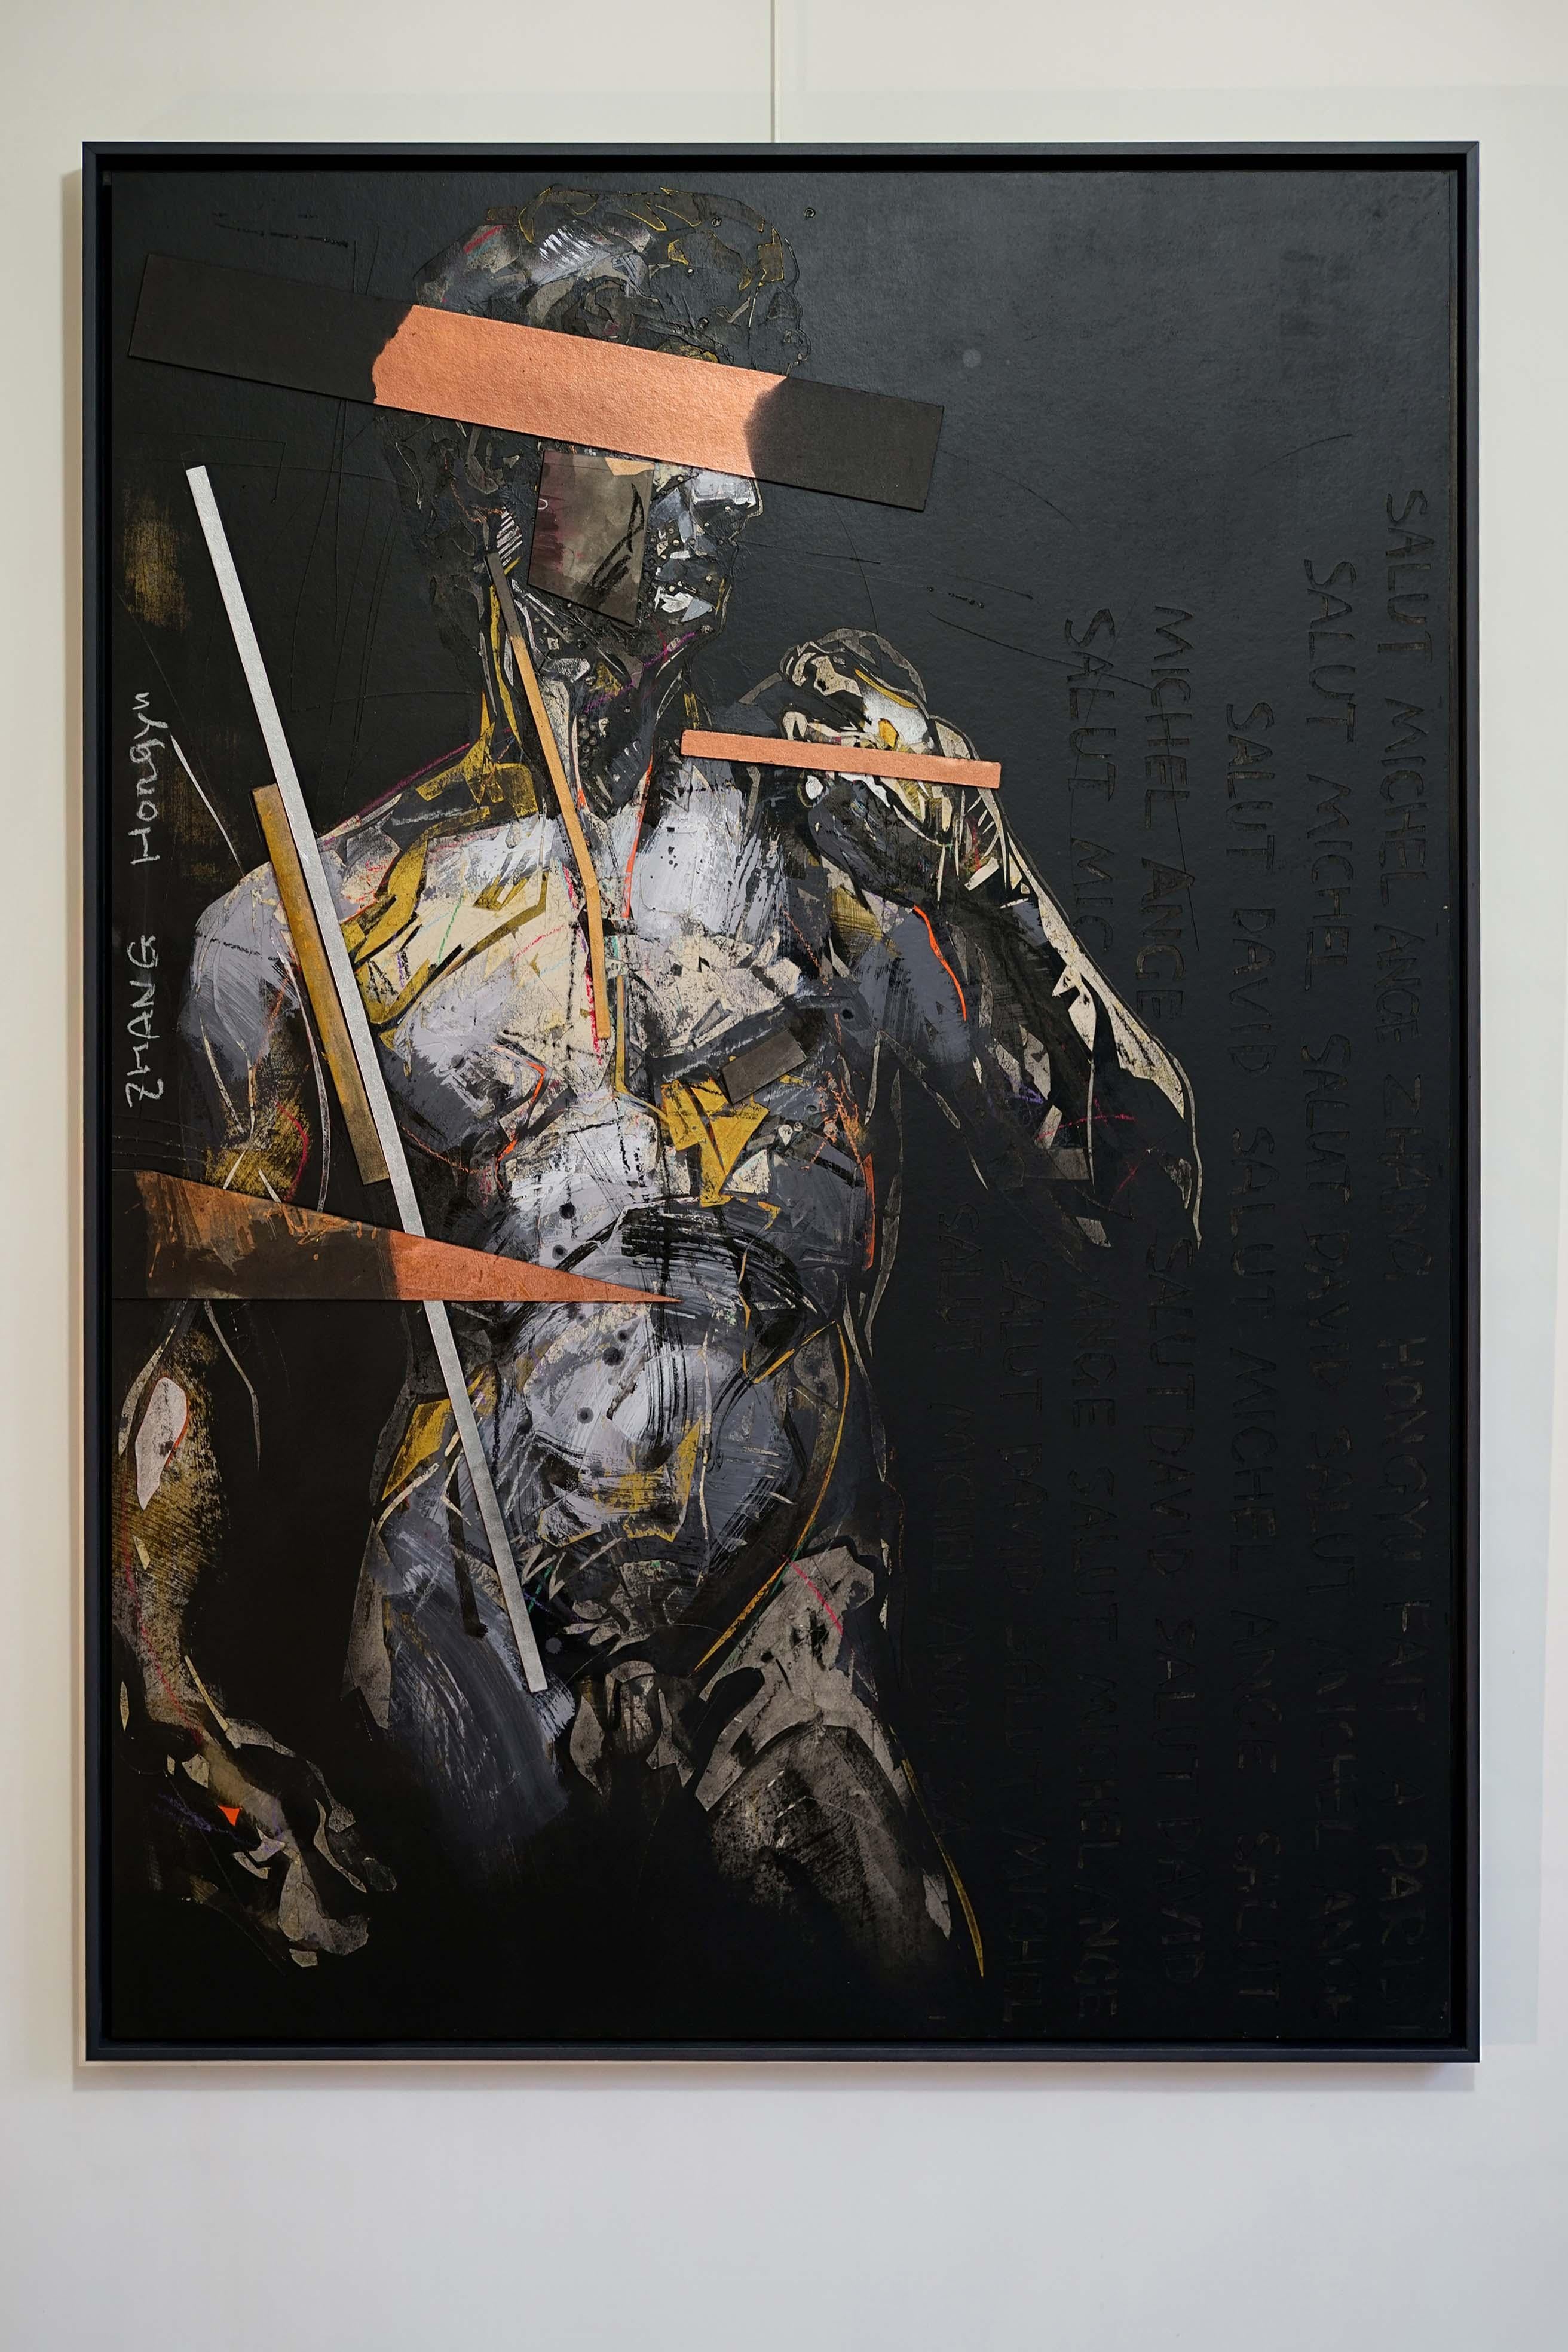 Tribute to Michelangelo III is a unique painting by contemporary artist Hongyu Zhang. The painting is made with Indian ink, pastel, acrylic, engraving and collage on cardboard mounted on canvas, dimensions are 140 × 100 cm (55.1 × 39.4 in). 
The